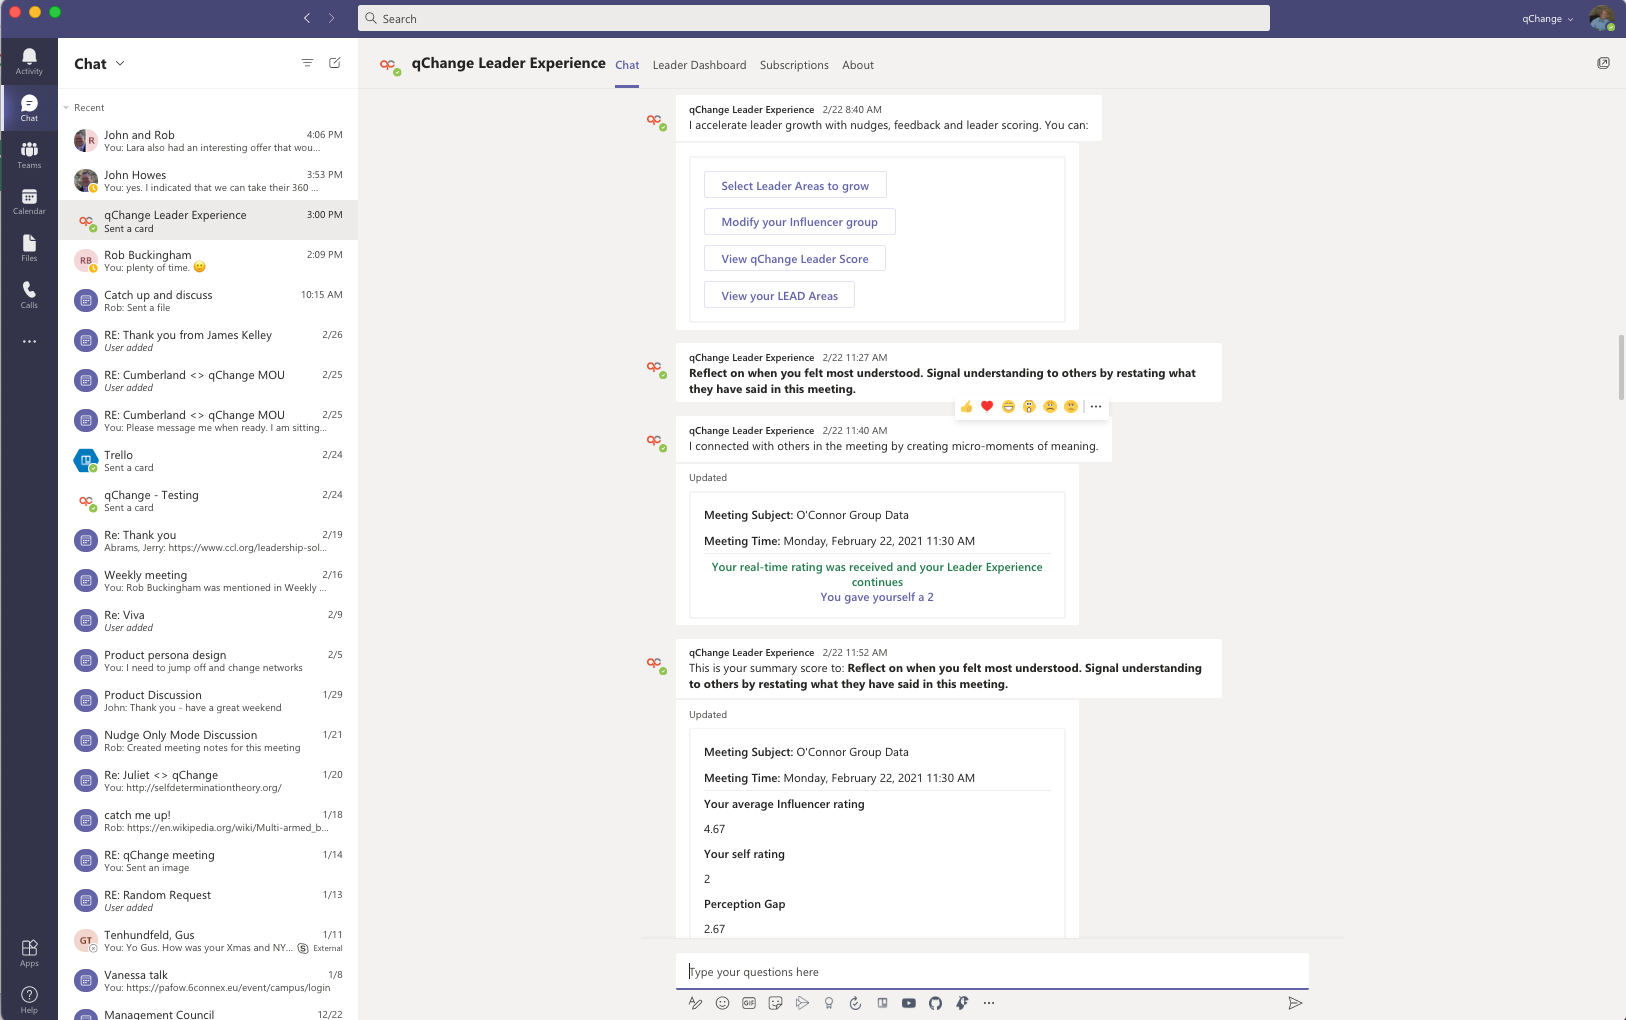 What the solution looks like in Microsoft Teams.